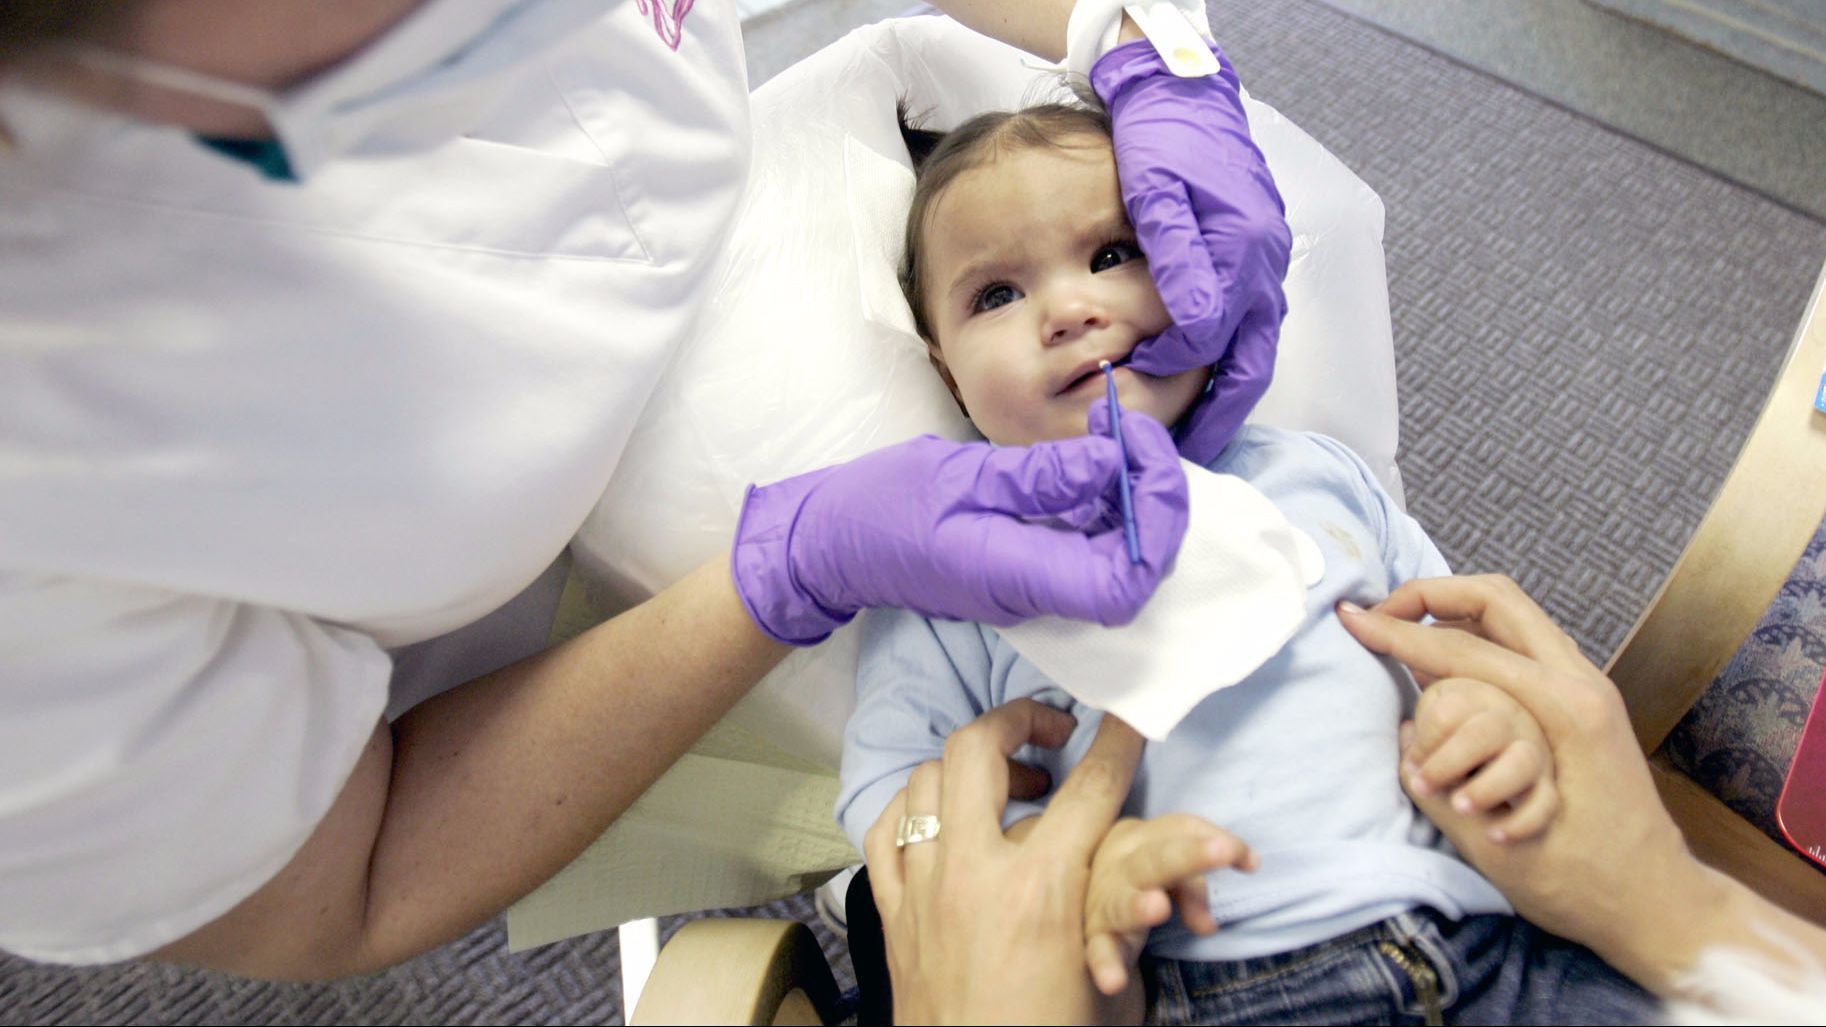 One of the problems with giving juice to infants and toddlers is the risk of tooth decay.